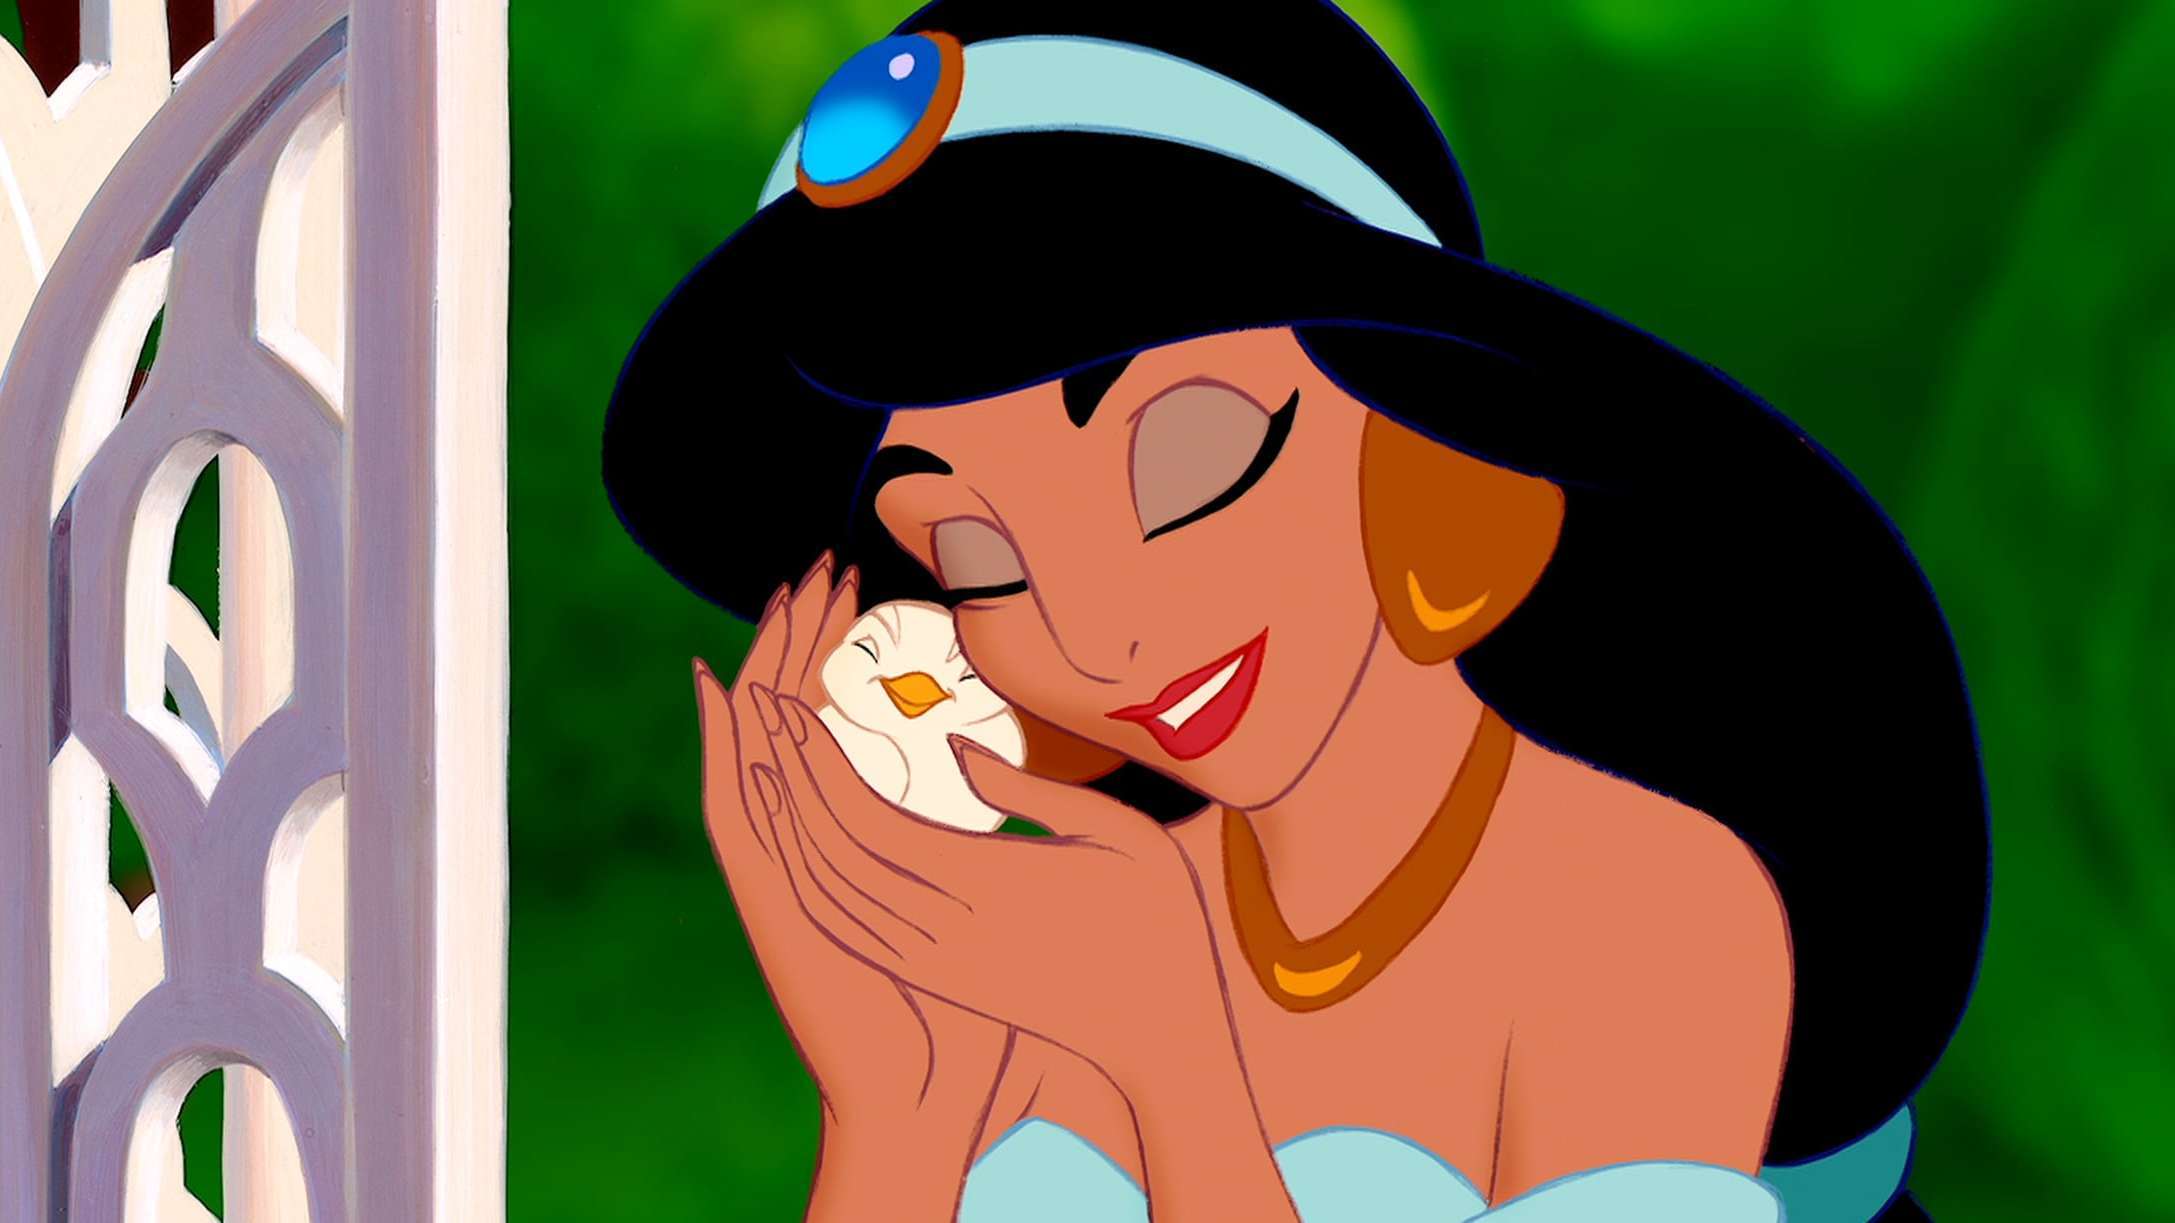 Jasmine petting a small bird outside in her courtyard. 